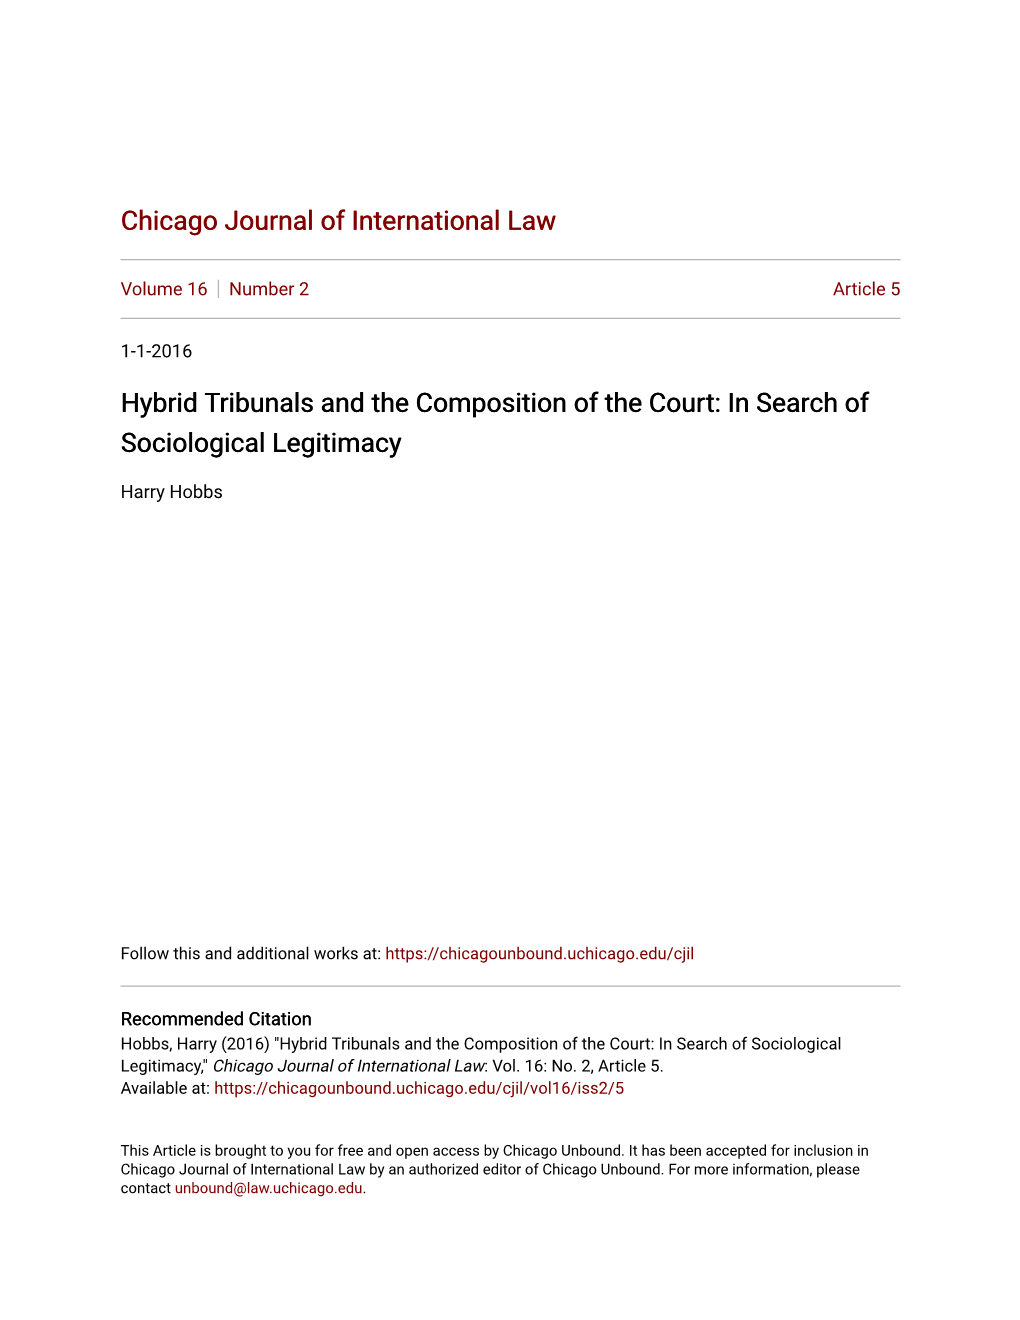 Hybrid Tribunals and the Composition of the Court: in Search of Sociological Legitimacy